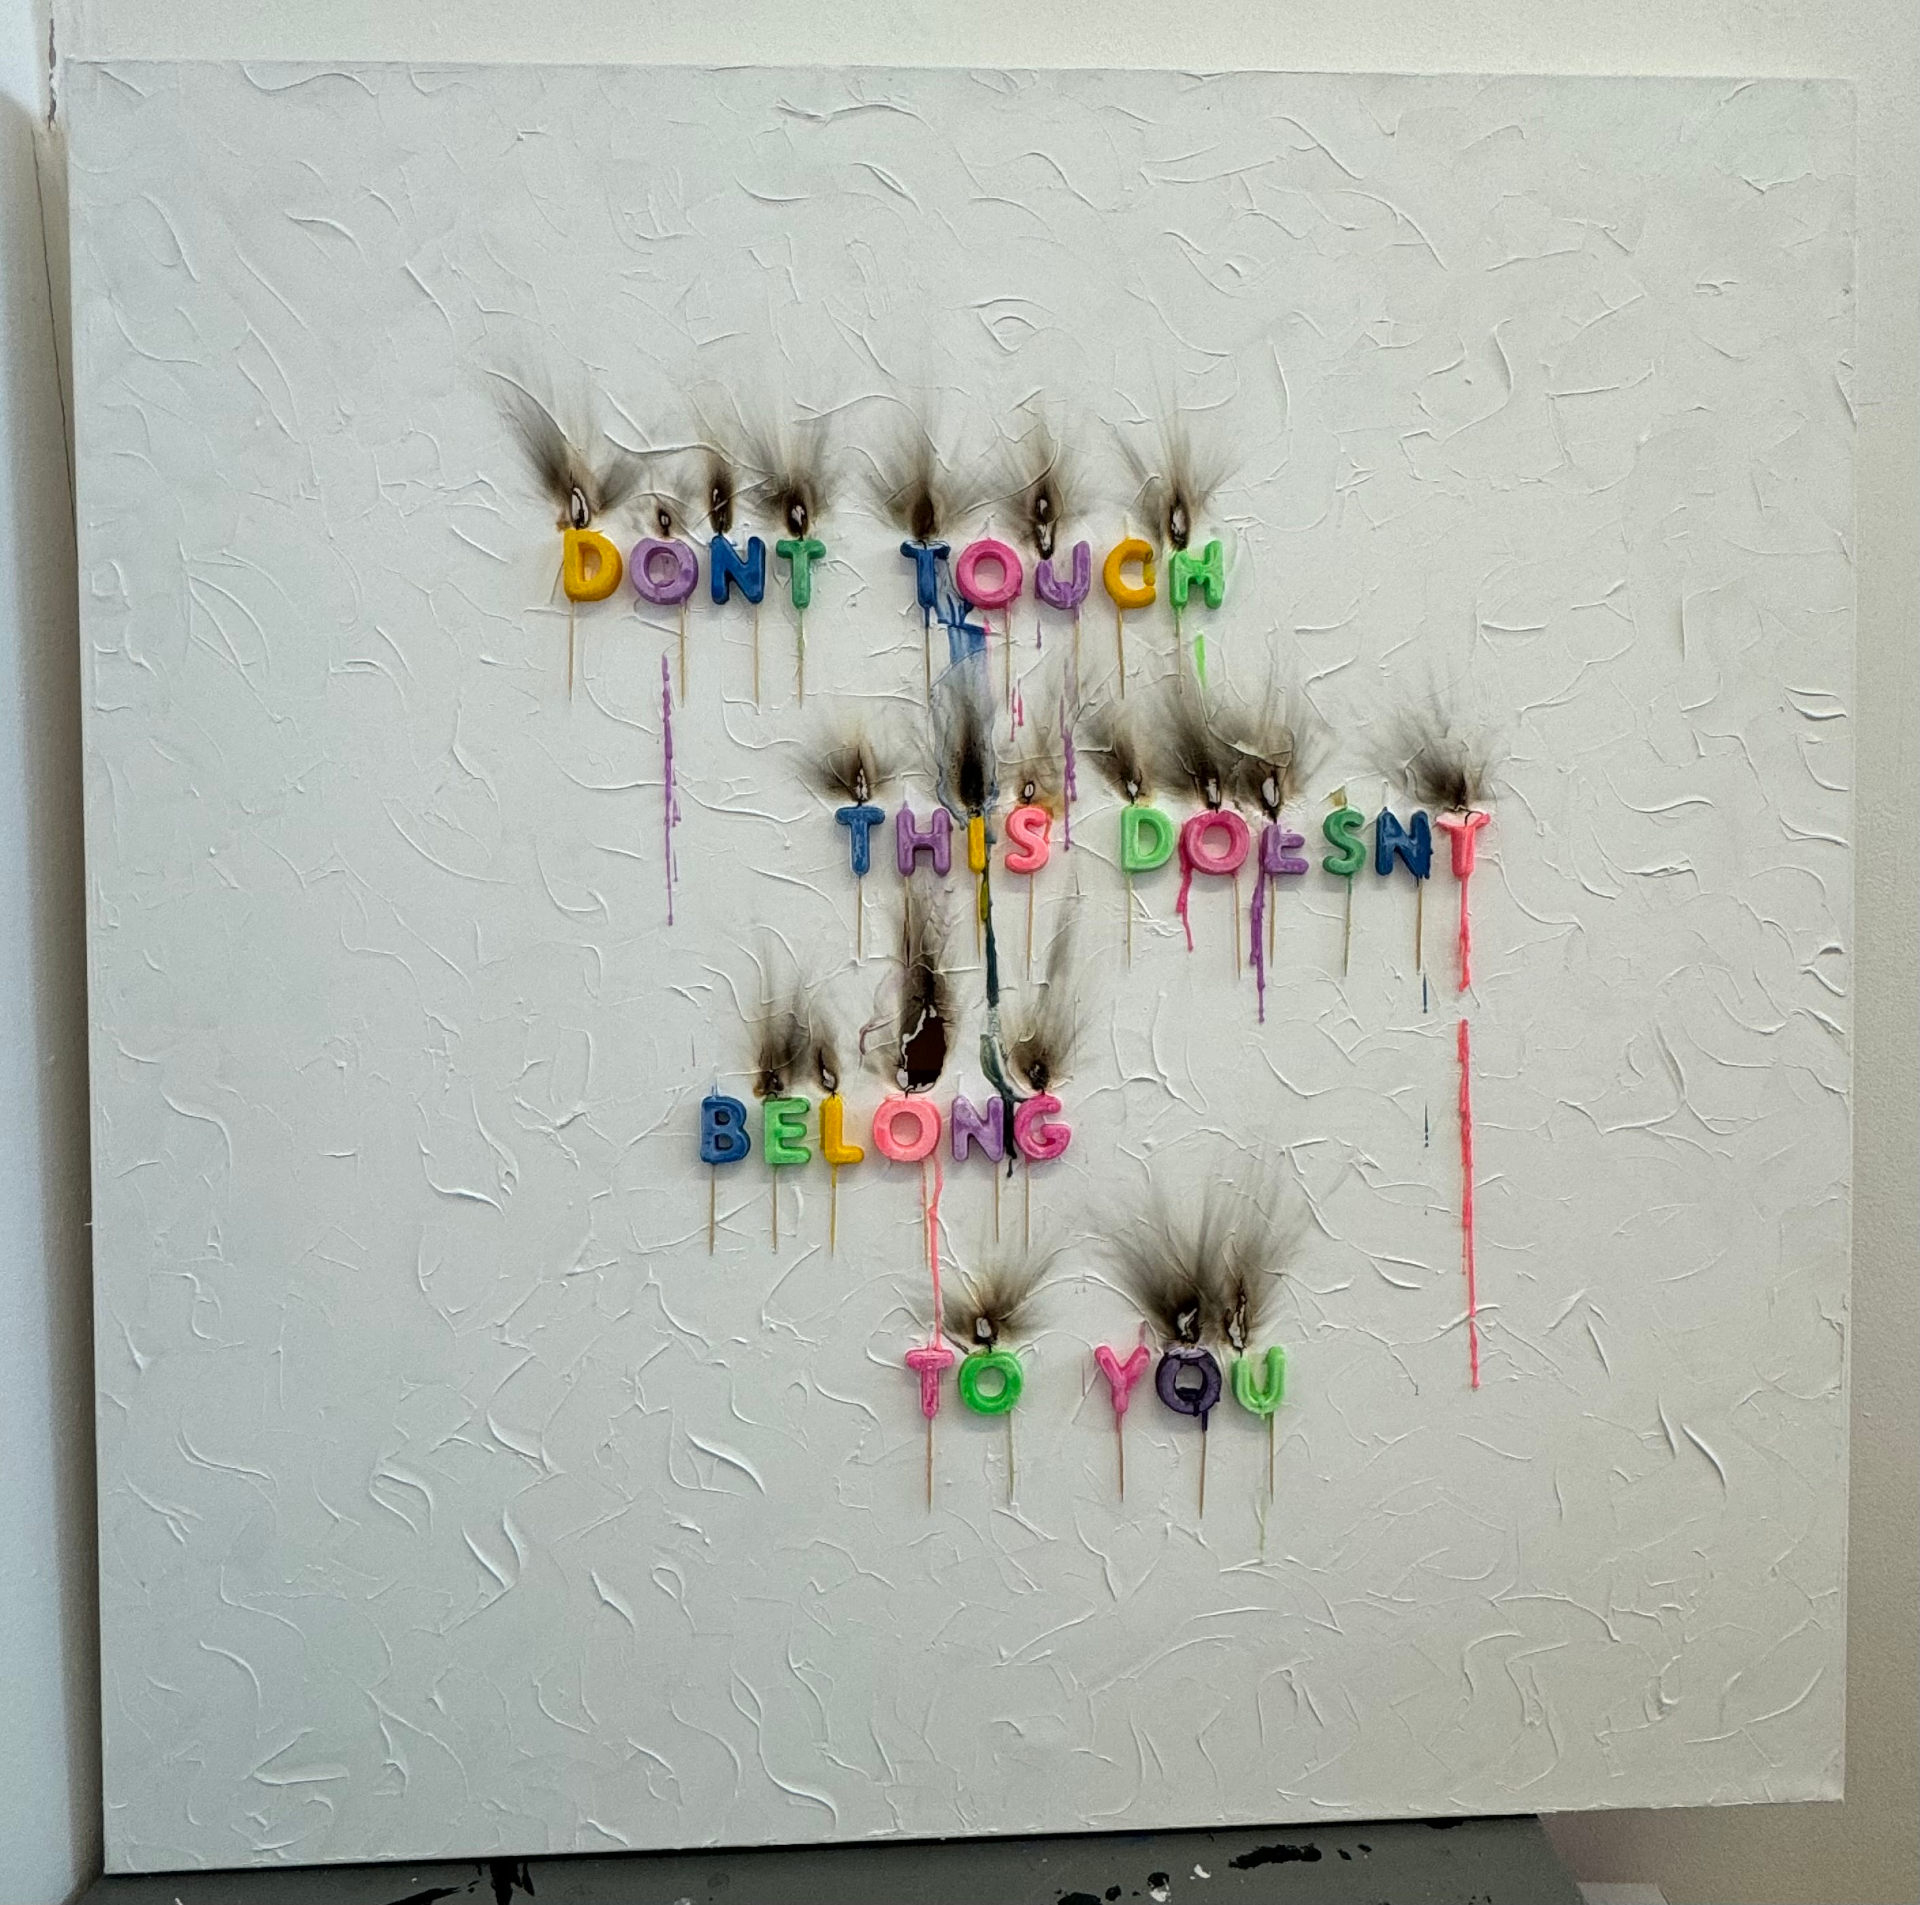 Canvas with fridge magnet letters spelling out 